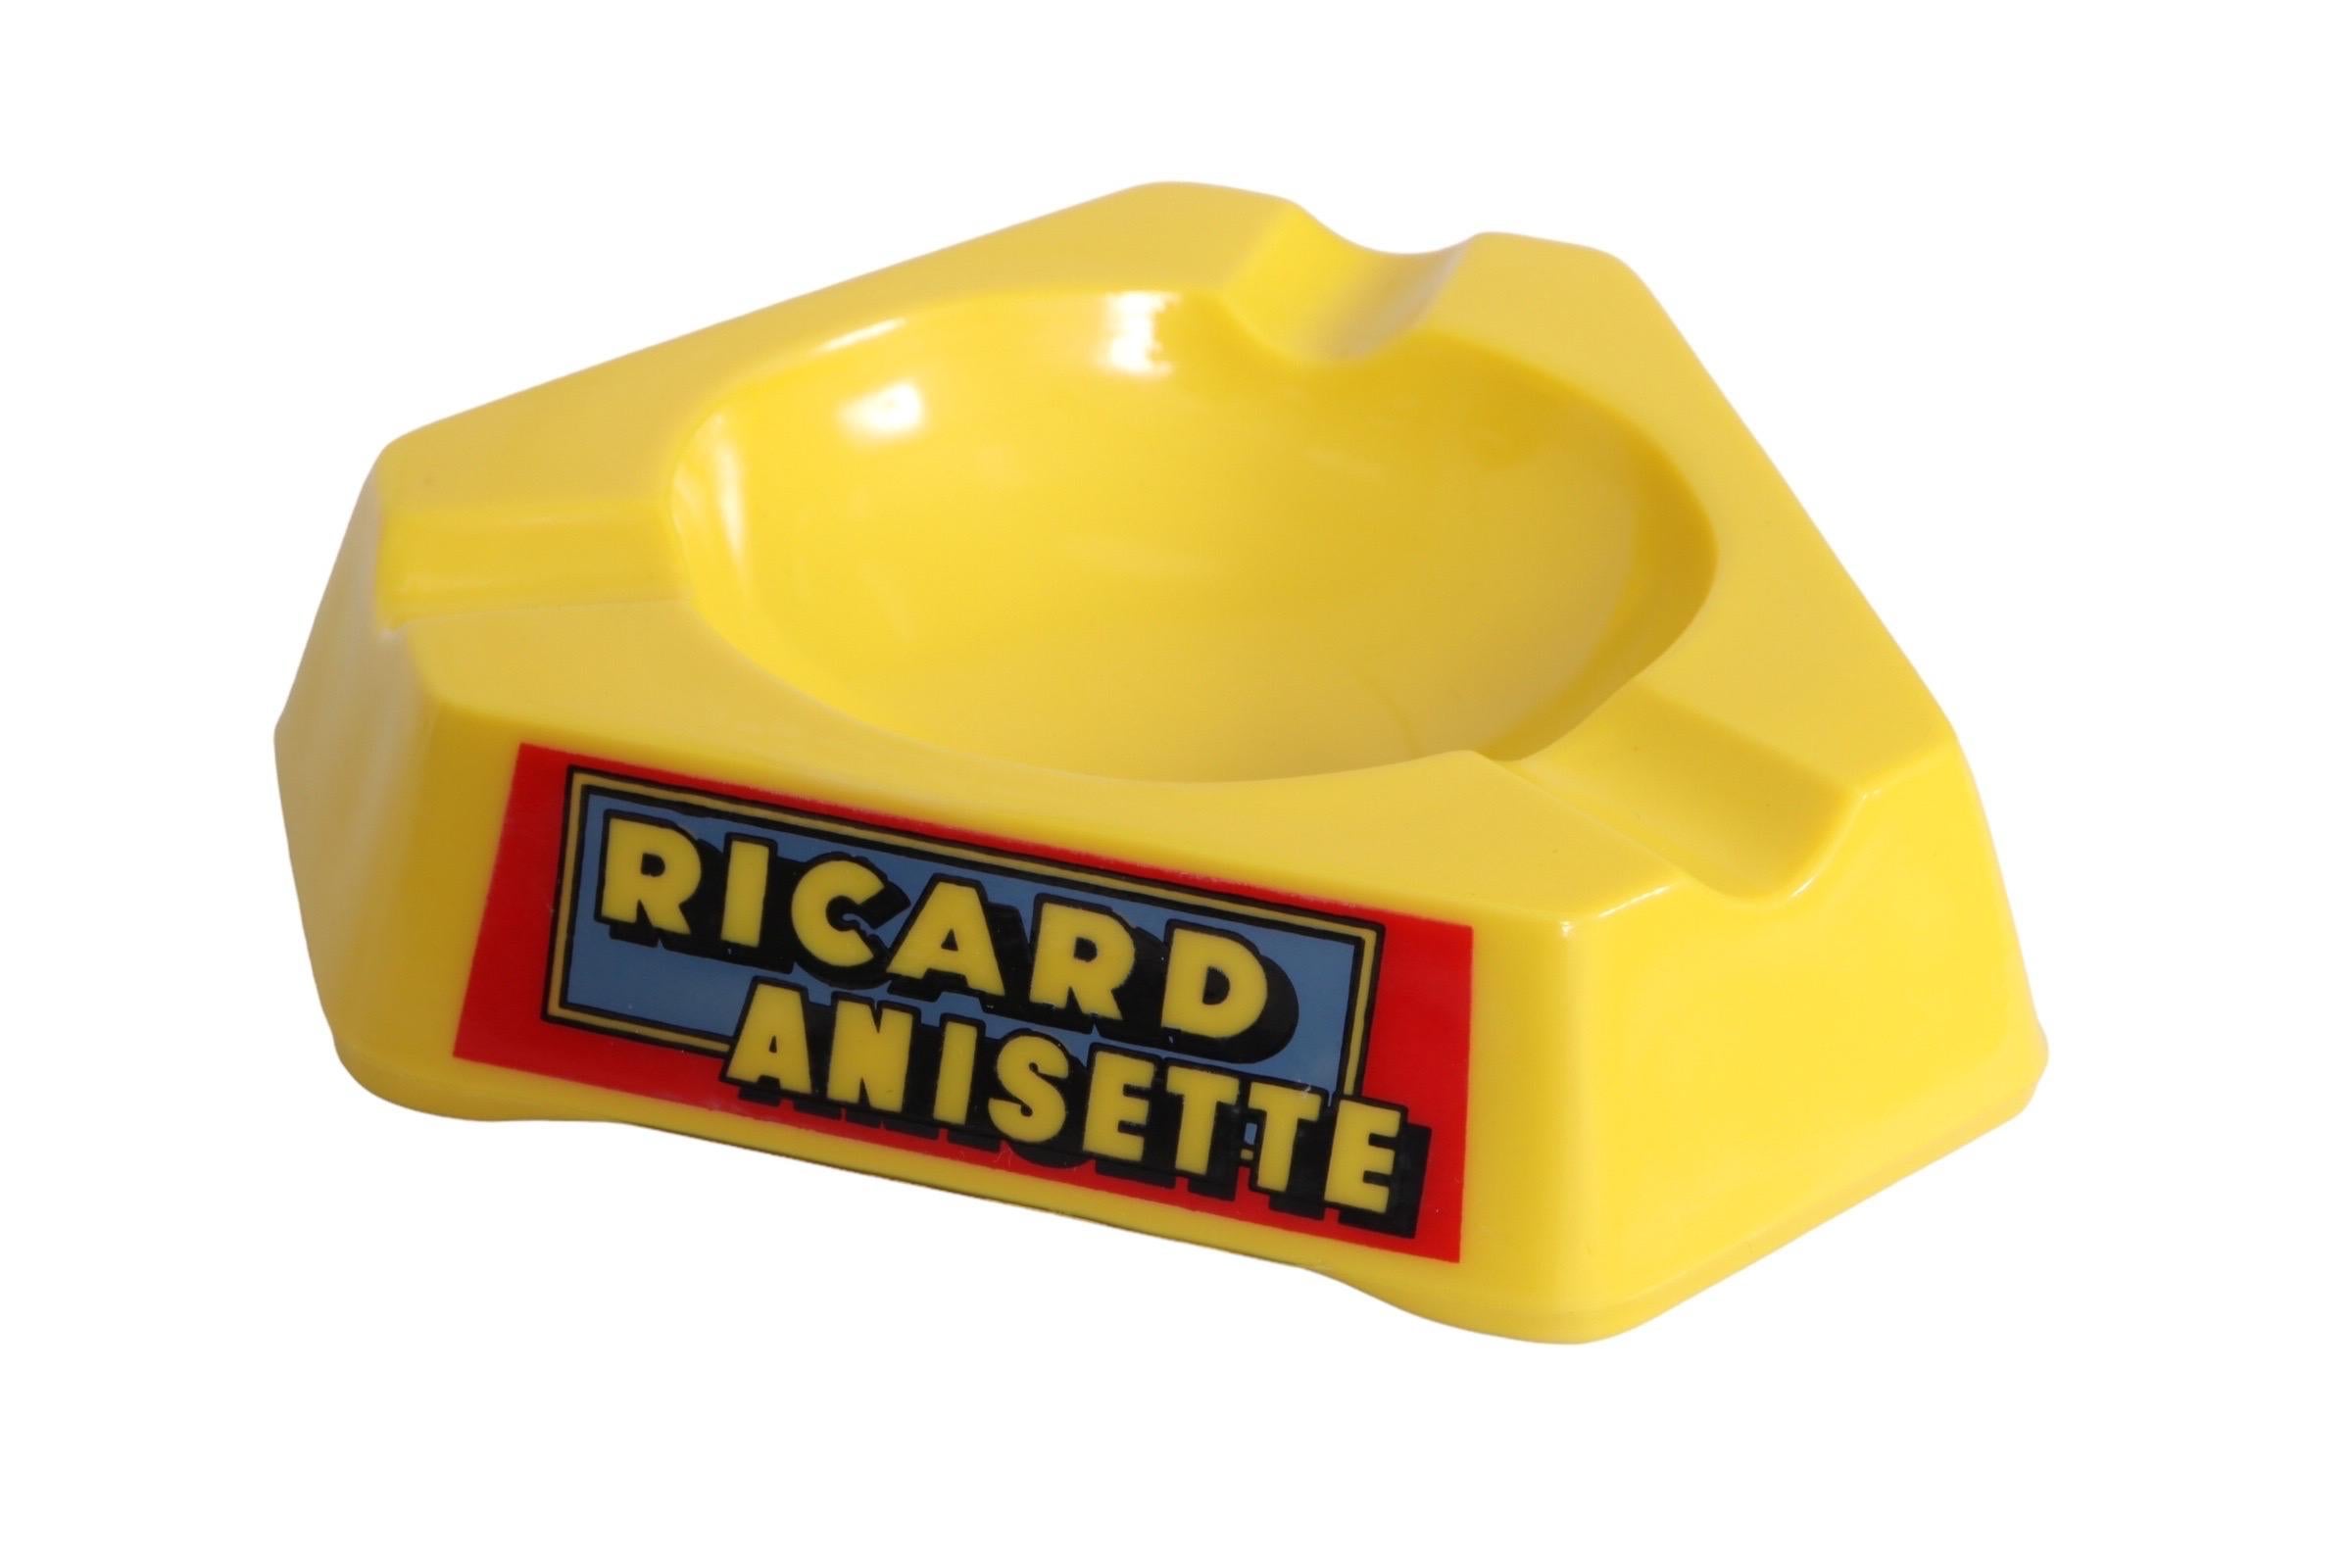 A Ricard branded triangular ashtray. Made of yellow opalex with a round central dish, each corner has beveled cigarette rests. Sides read Ricard Anisette in a bold font set over a blue and red background. Marked “Opalex, Made in France”